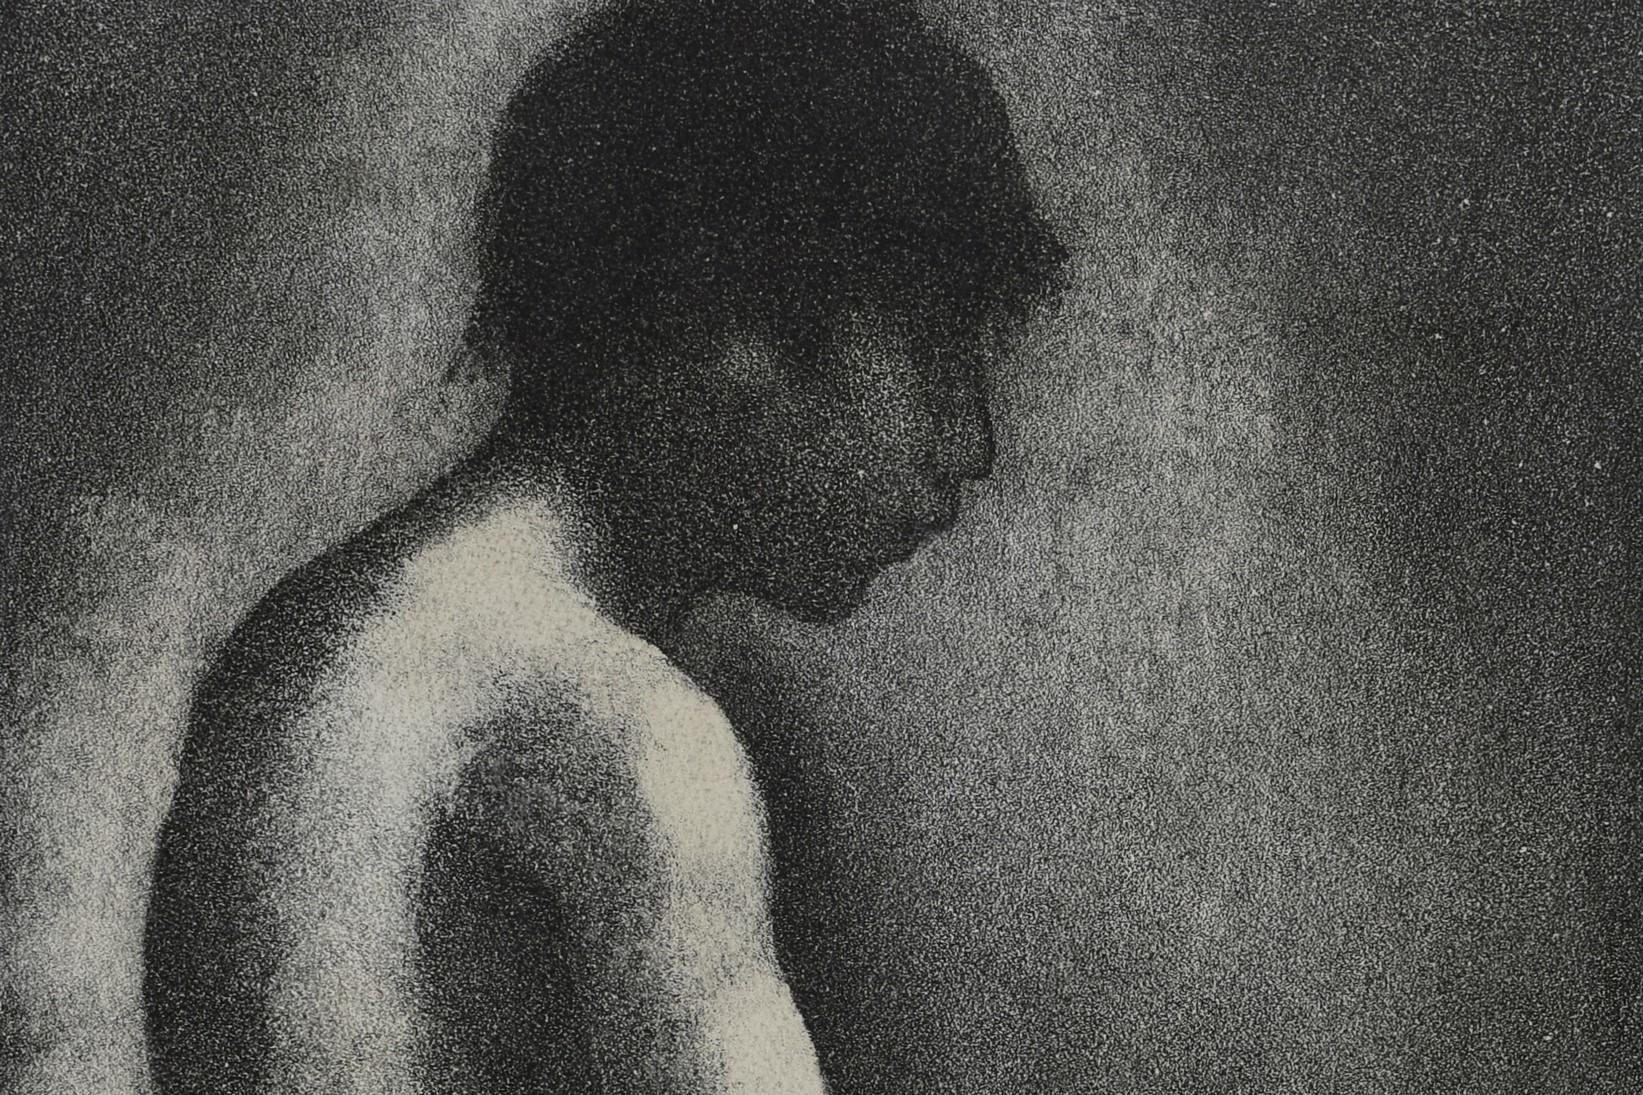 Georges Seurat | Lithograph | From a study realized in 1883 for "Une baignade à Asnières" / "Bathing in Asnières" (1884)